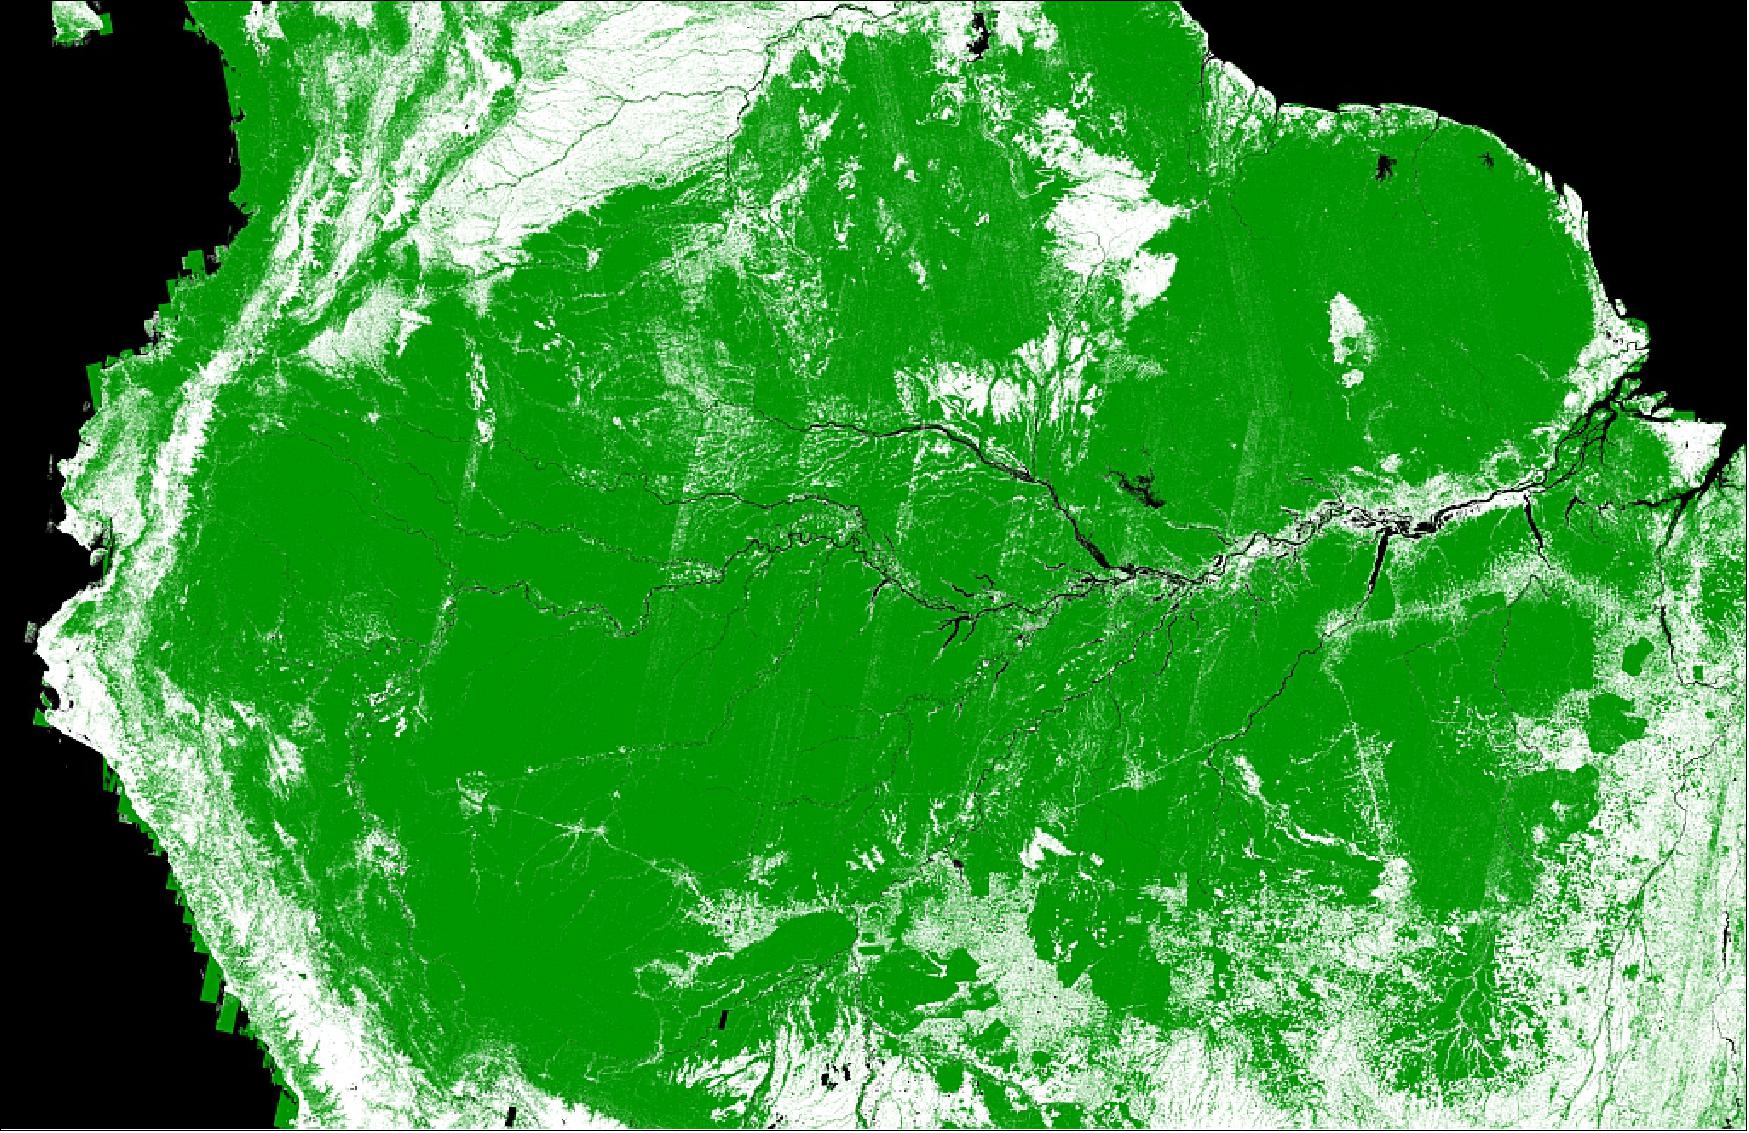 Figure 17: TanDEM-X Forest/Non-Forest Map example over the Amazon Rainforest (image credit: DLR)